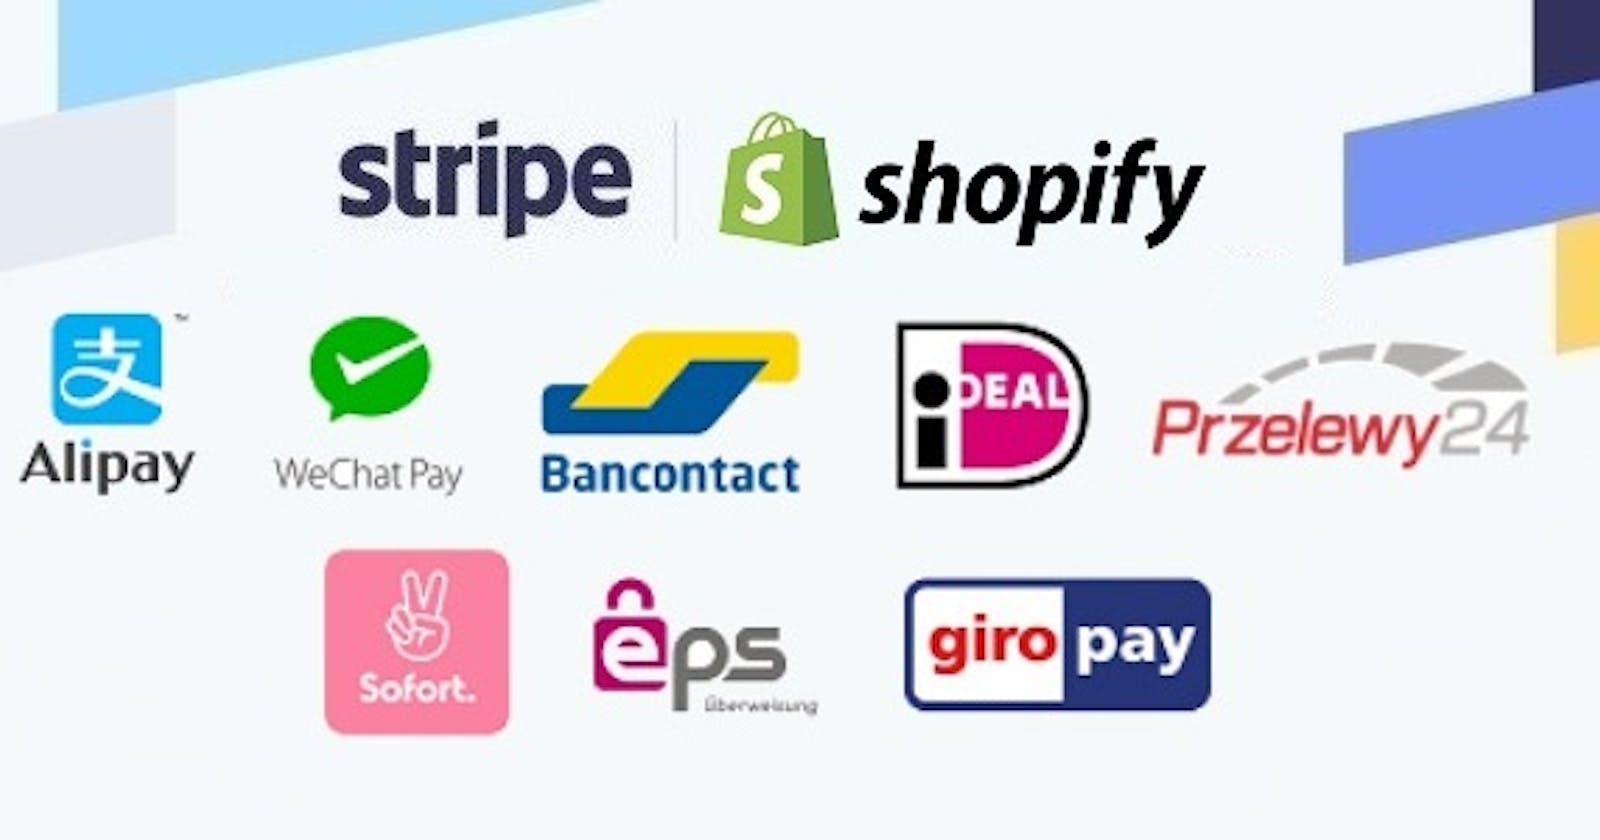 Get paid for your Shopify orders via Stripe with Alipay, Bancontact, EPS, giropay, iDEAL, Przelewy24, Sofort, WeChat Pay